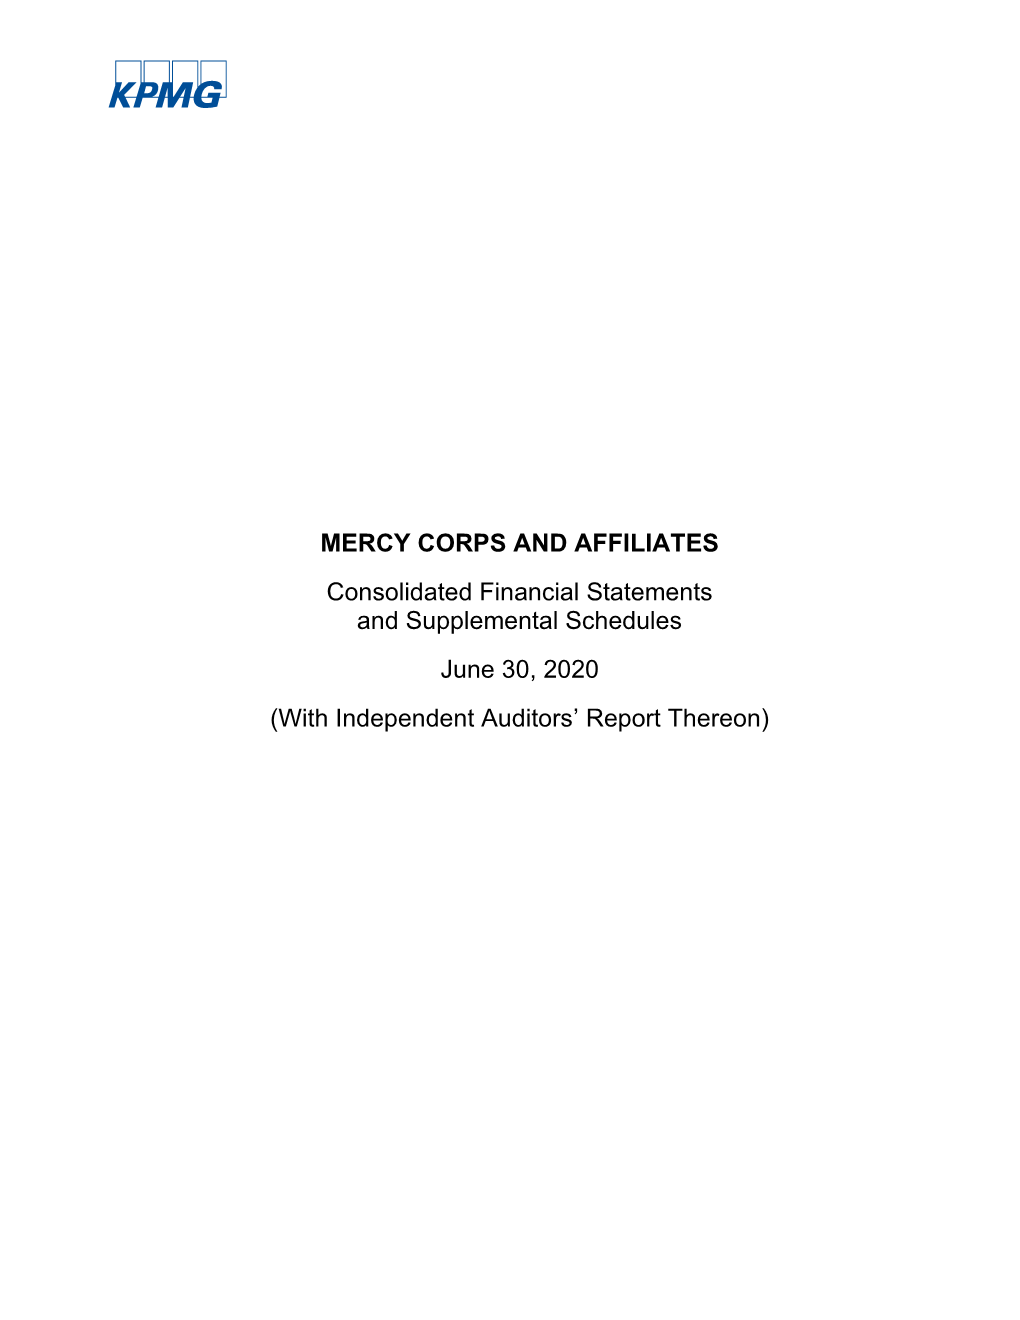 MERCY CORPS and AFFILIATES Consolidated Financial Statements and Supplemental Schedules June 30, 2020 (With Independent Auditors’ Report Thereon)